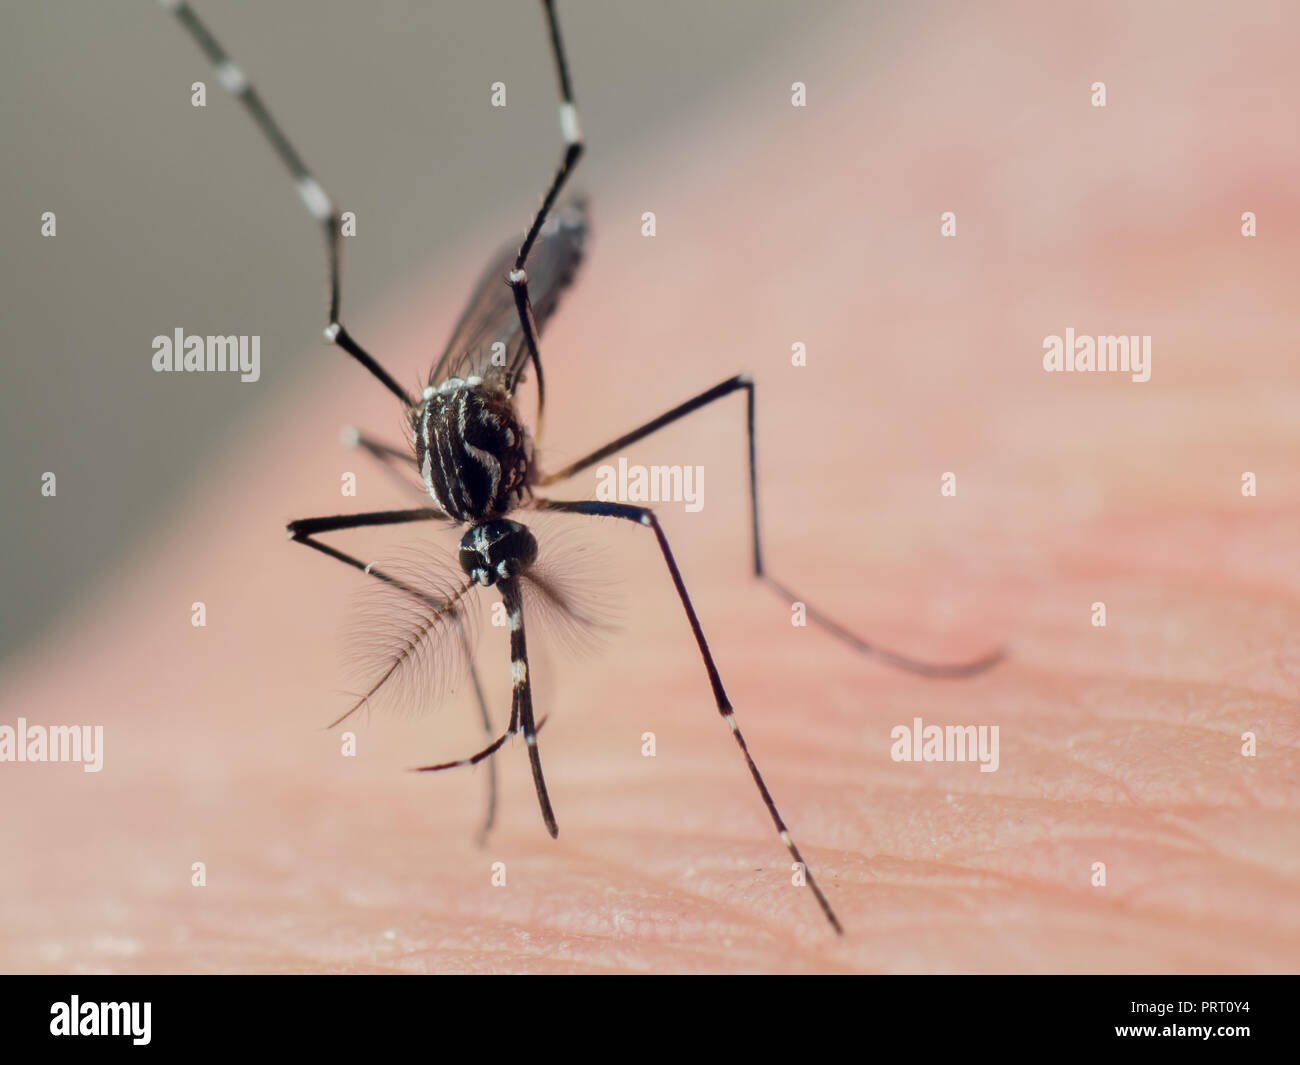 Male yellow fever mosquito (Aedes aegypti) sitting over human skin, it's a disease vector for dengue fever, west nile virus, chikungunya and zika. Stock Photo